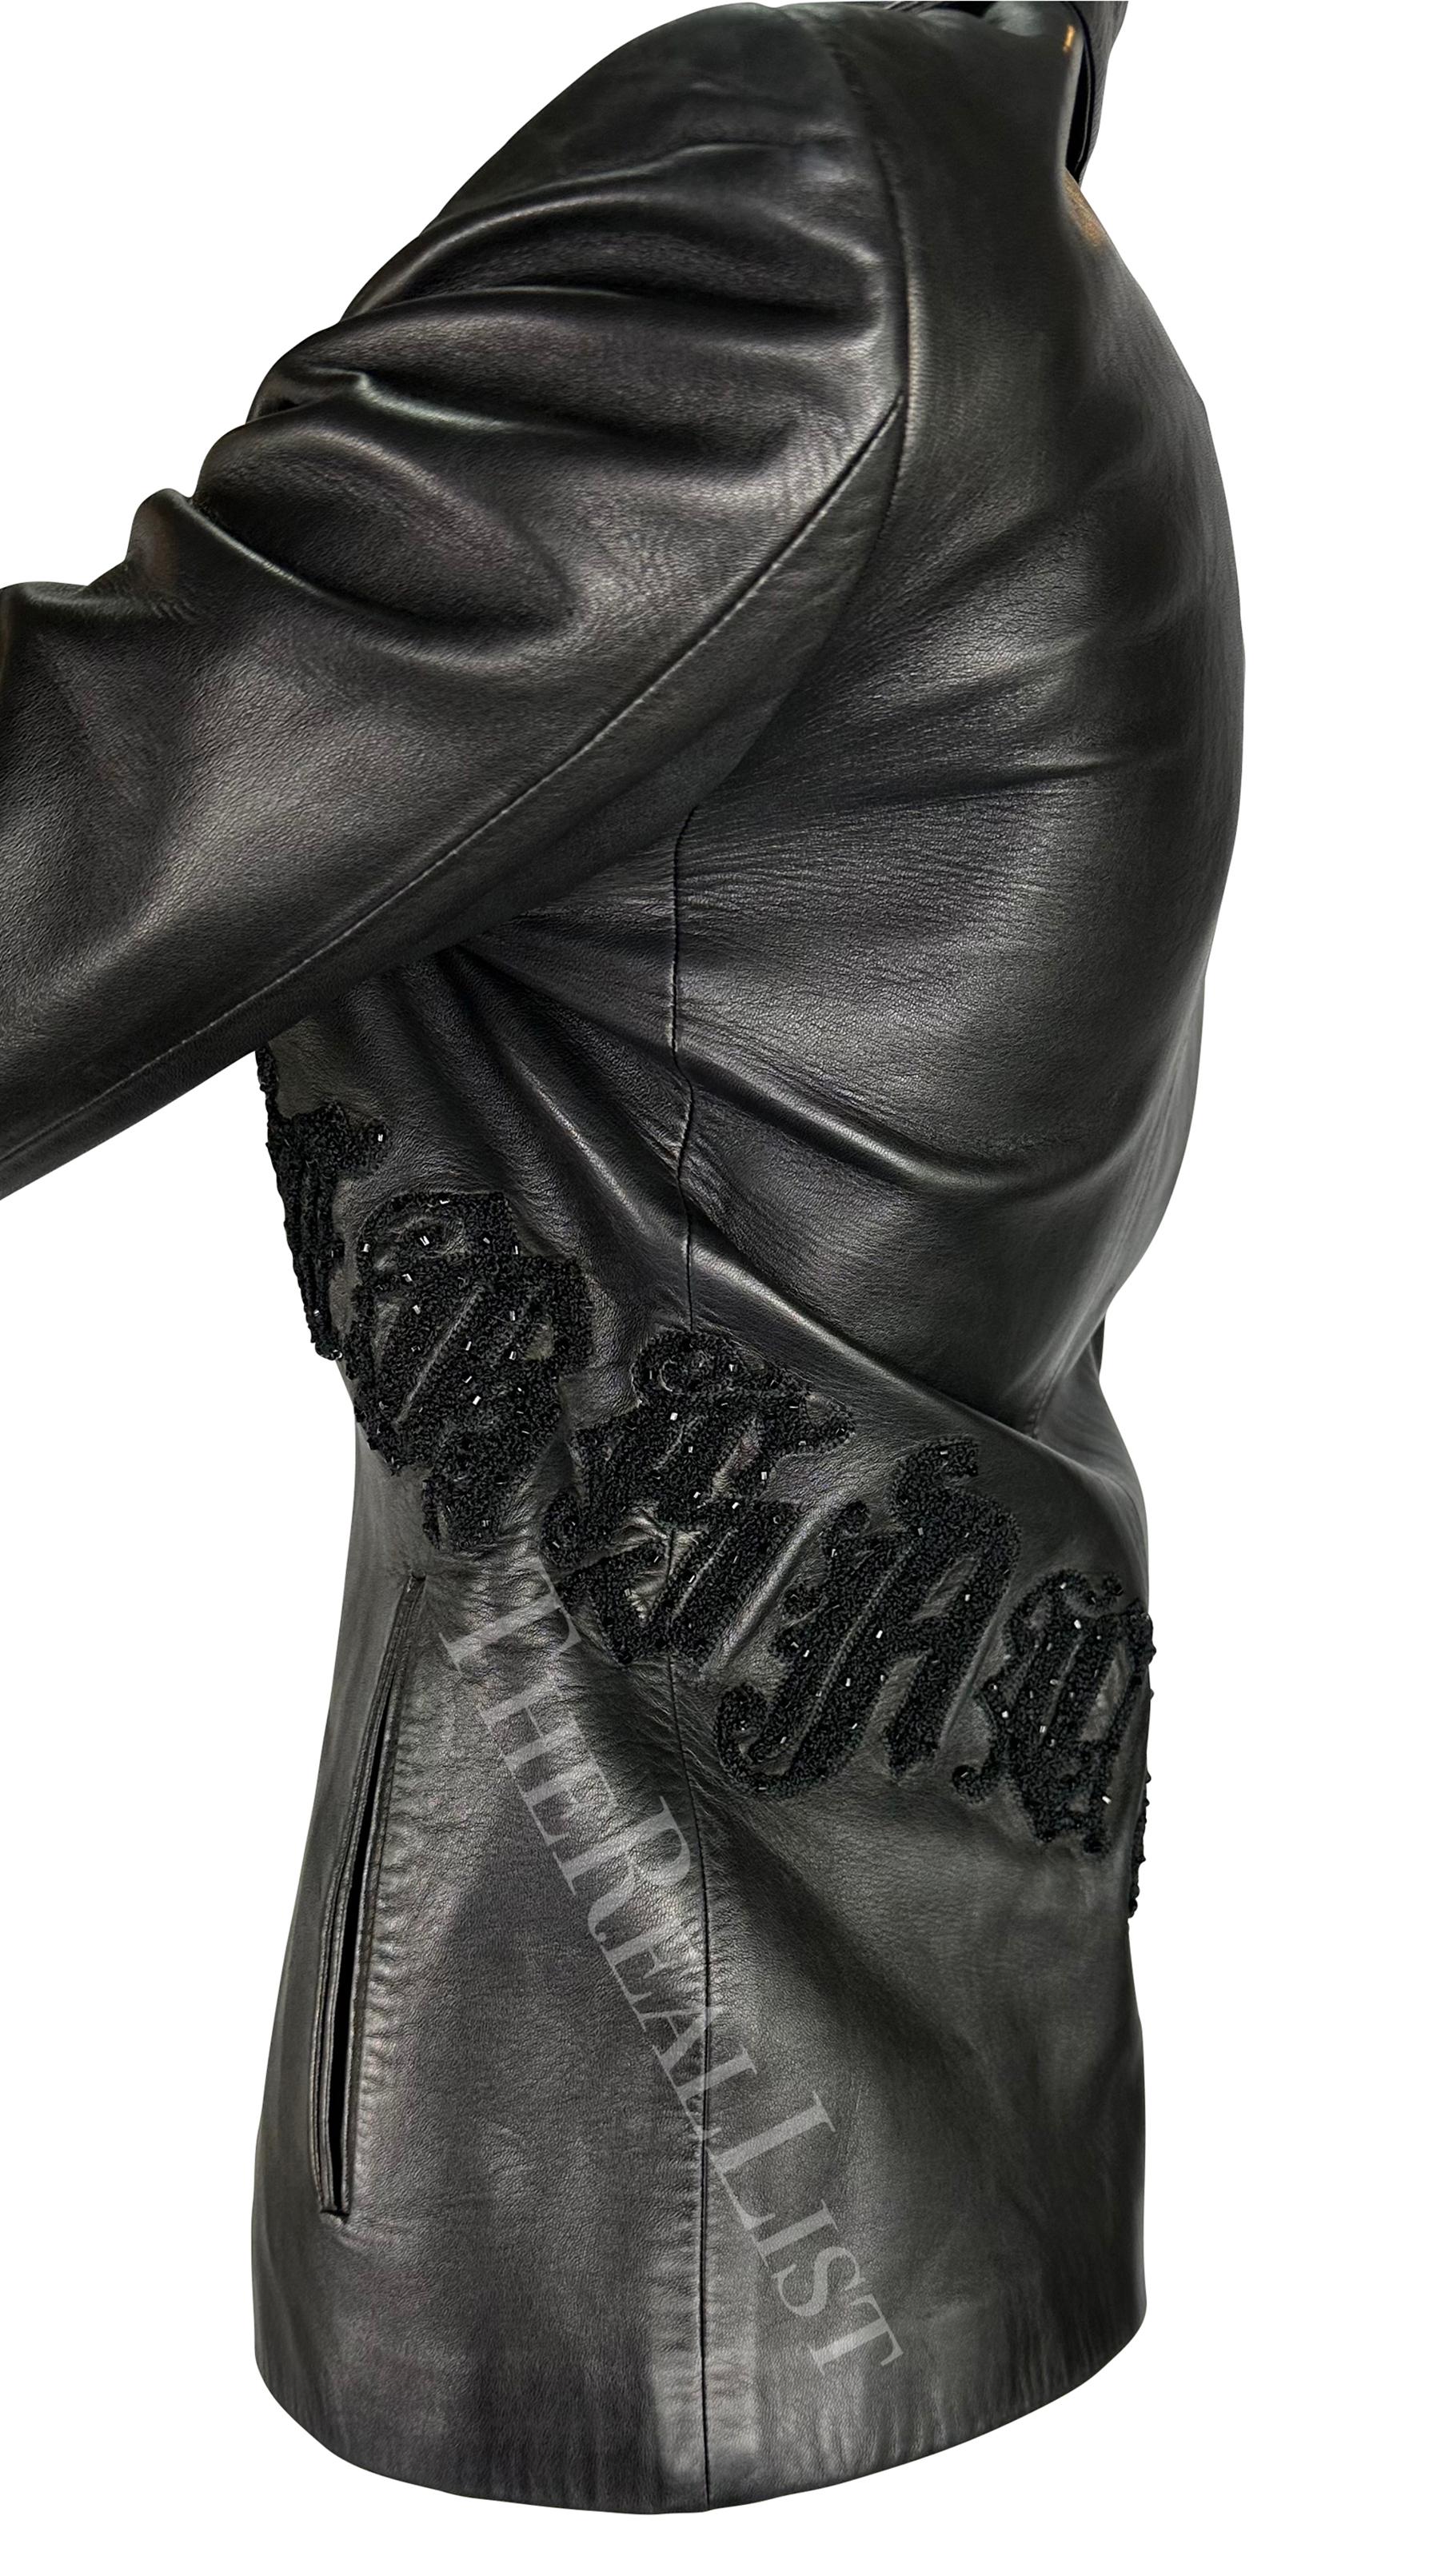 Presenting a black Gianni Versace leather jacket, designed by Donatella Versace. From the Fall/Winter 1999 collection, this jacket is constructed entirely of leather and features a fold-over collar and zip closure. The jacket is amped up with beaded